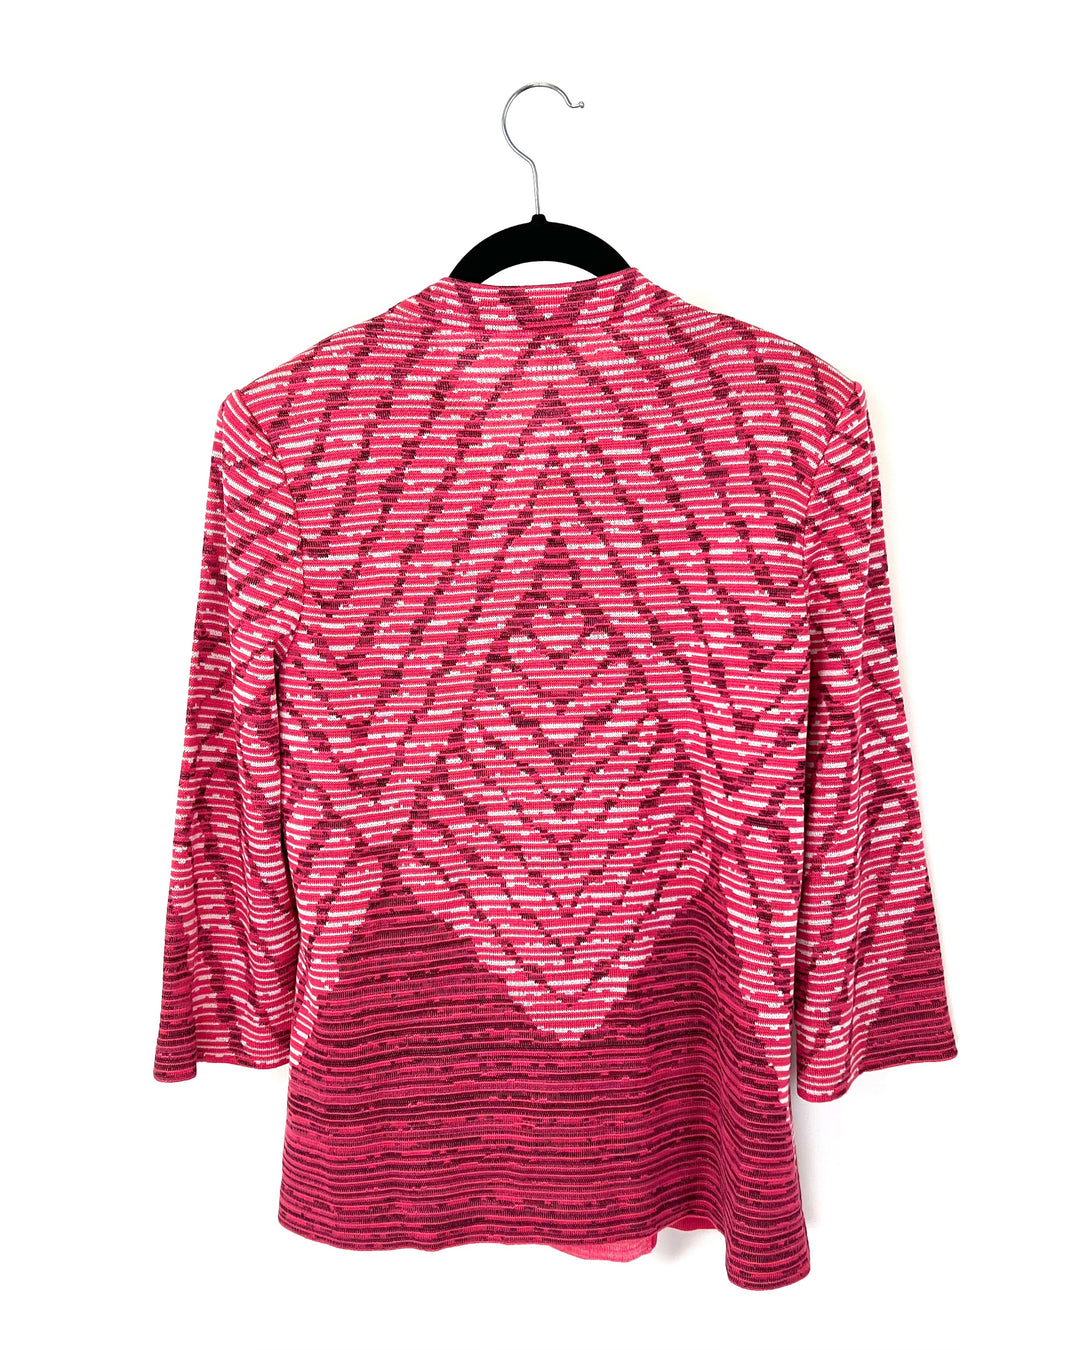 Pink Abstract Printed Zip Up - Size 2/4